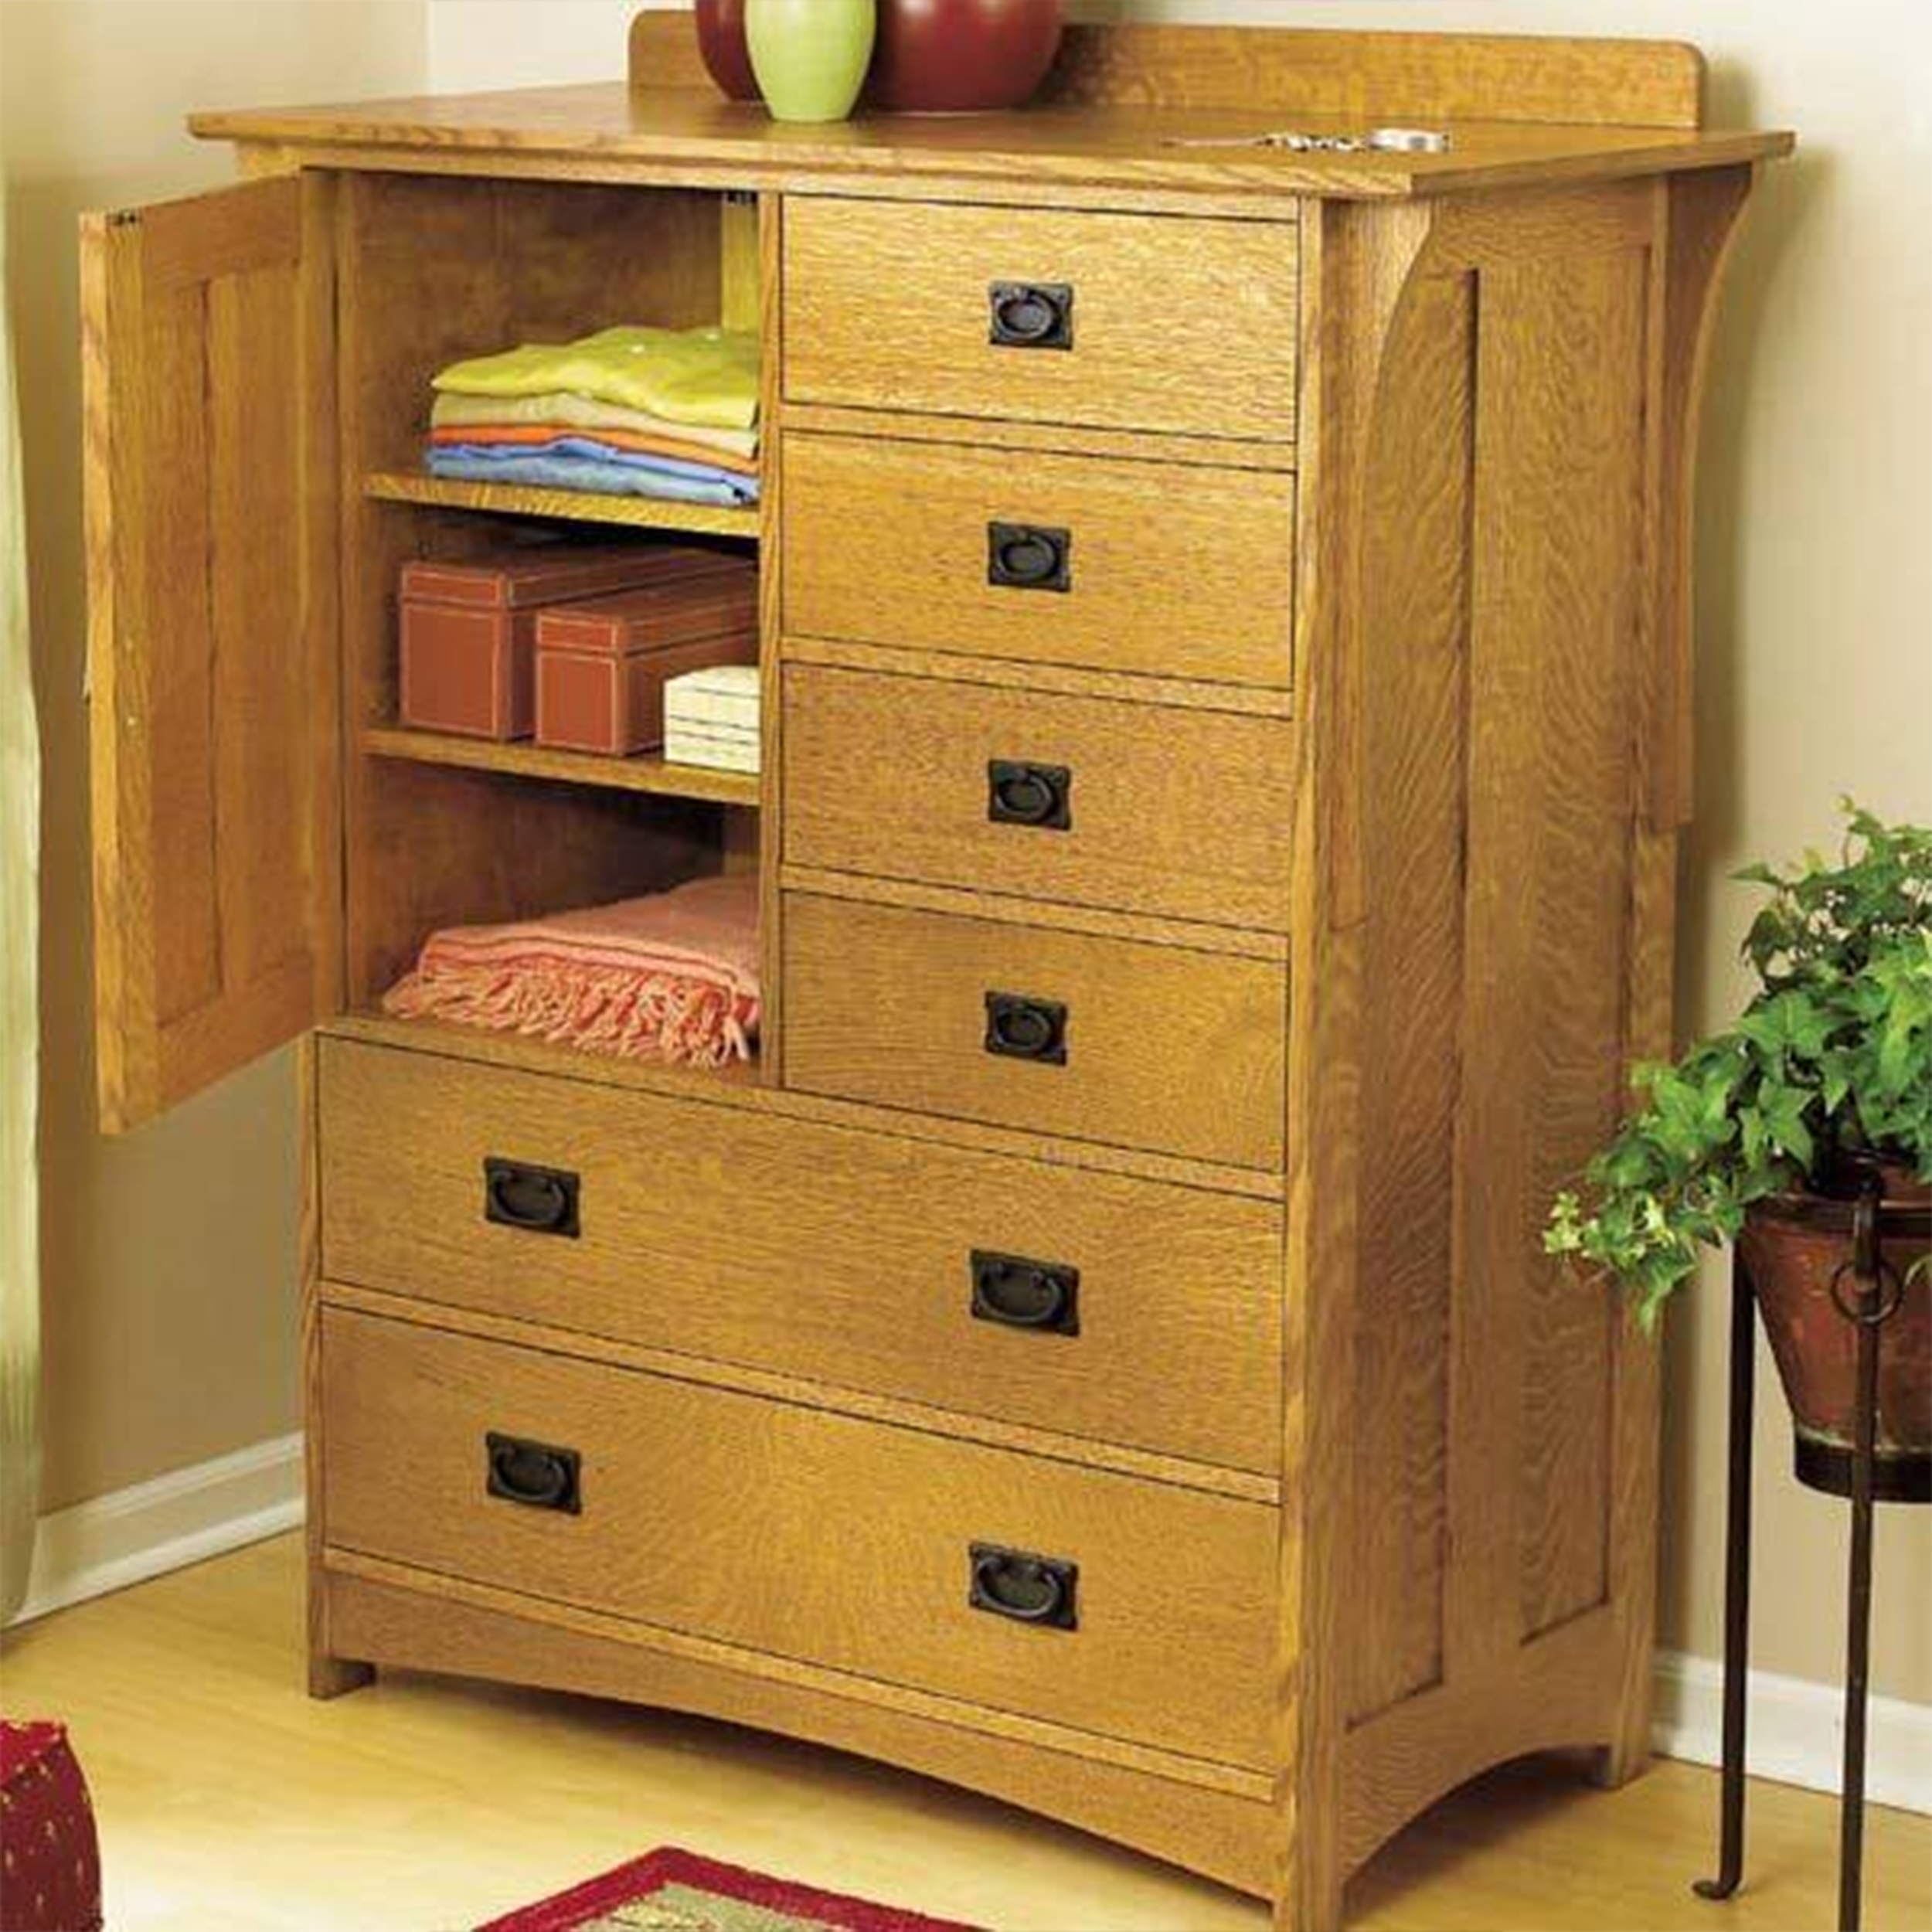 Downloadable Woodworking Project Plan To Build Arts And Crafts Dresser